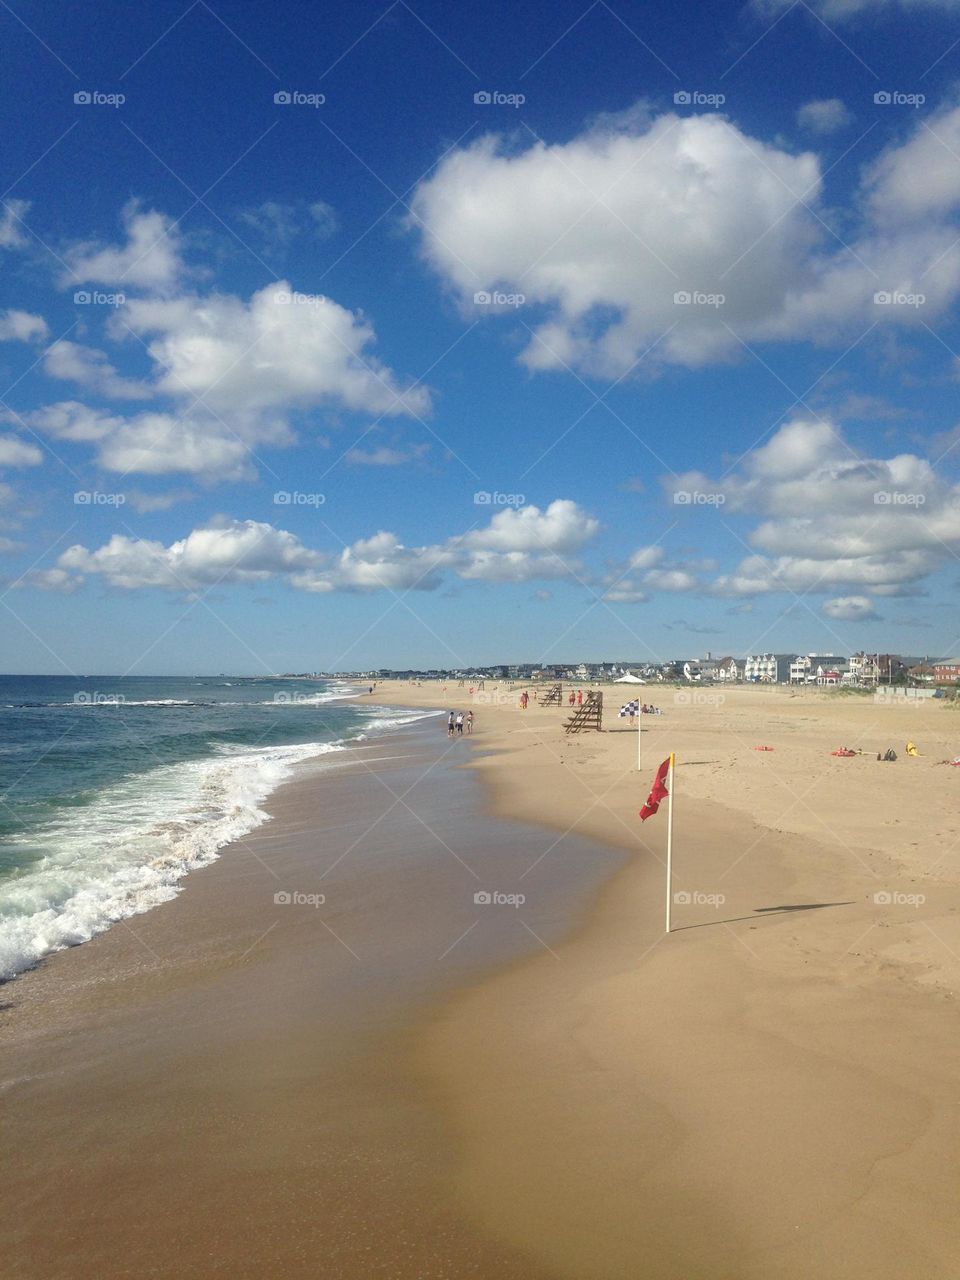 A view of the ocean and beach from a pier in Ocean Grove, NJ on a Spring day. This shot is looking toward the neighboring town of Bradley Beach. Puffy white clouds accent a bright blue sky, and waves are just cresting the sand. 